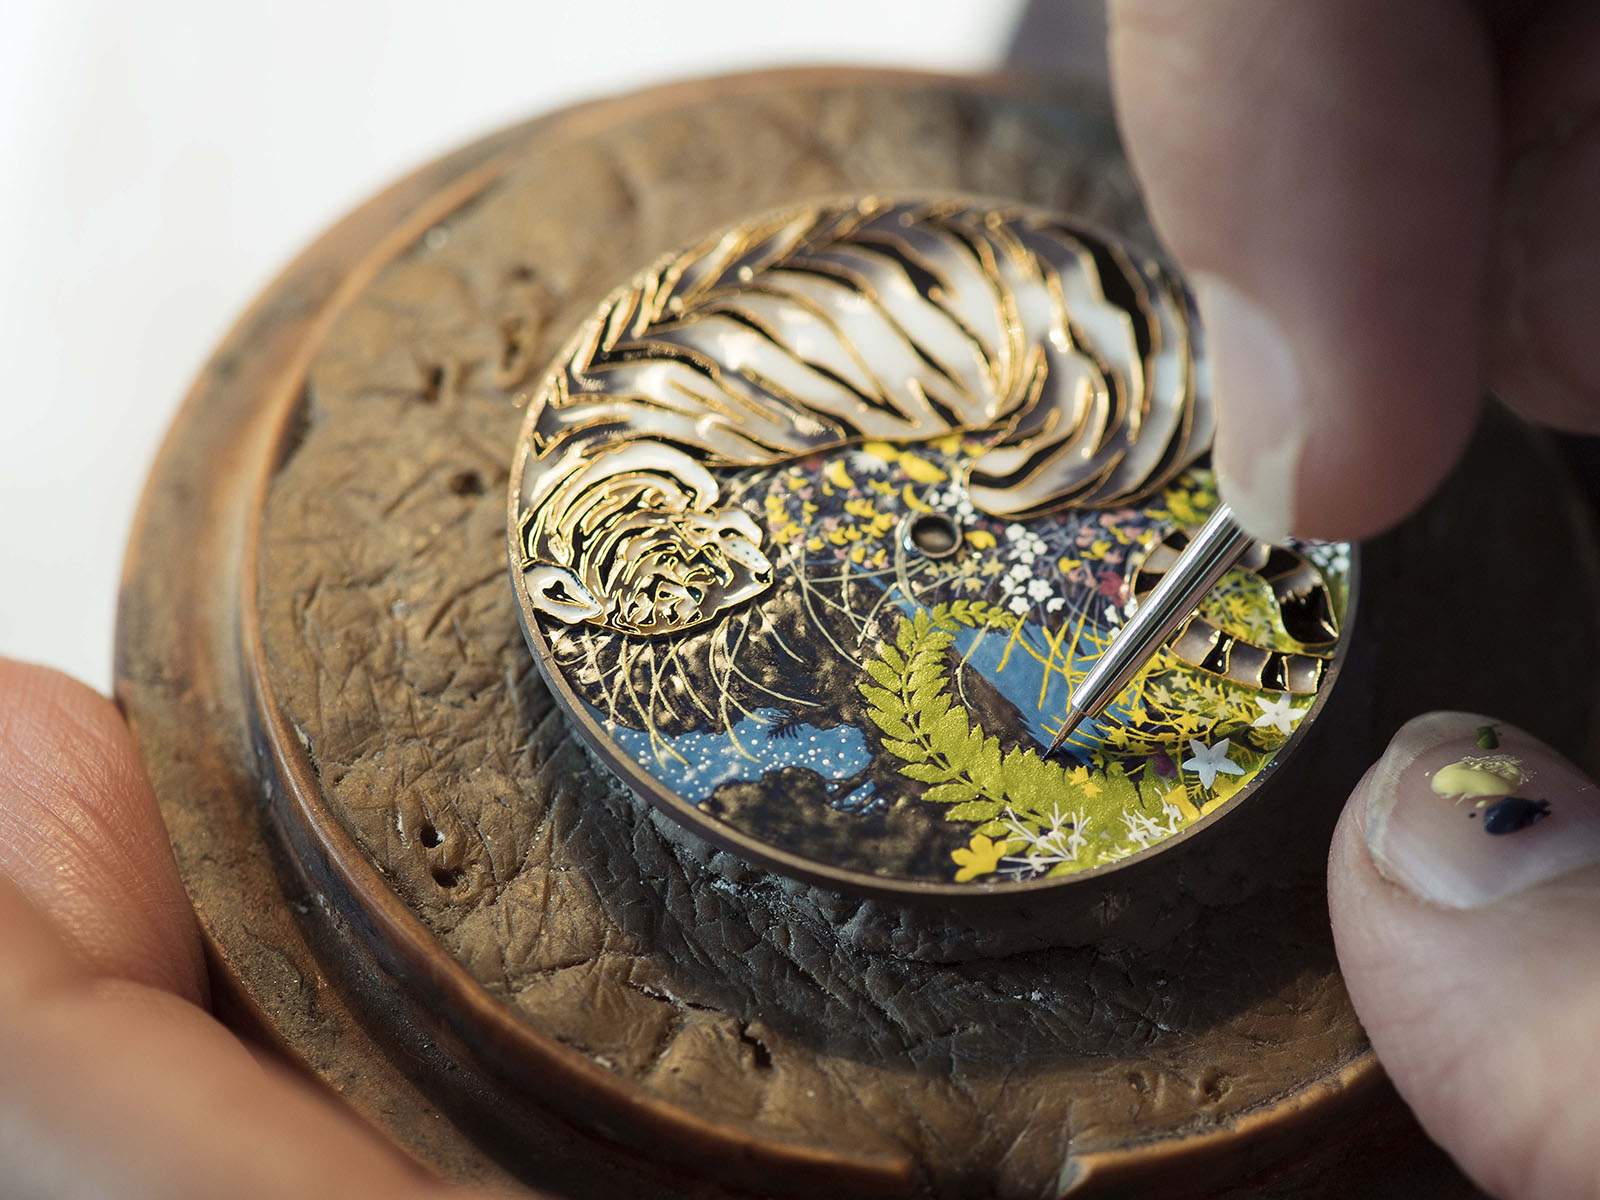 These artistic watches squeeze in stunning works of art on the dial